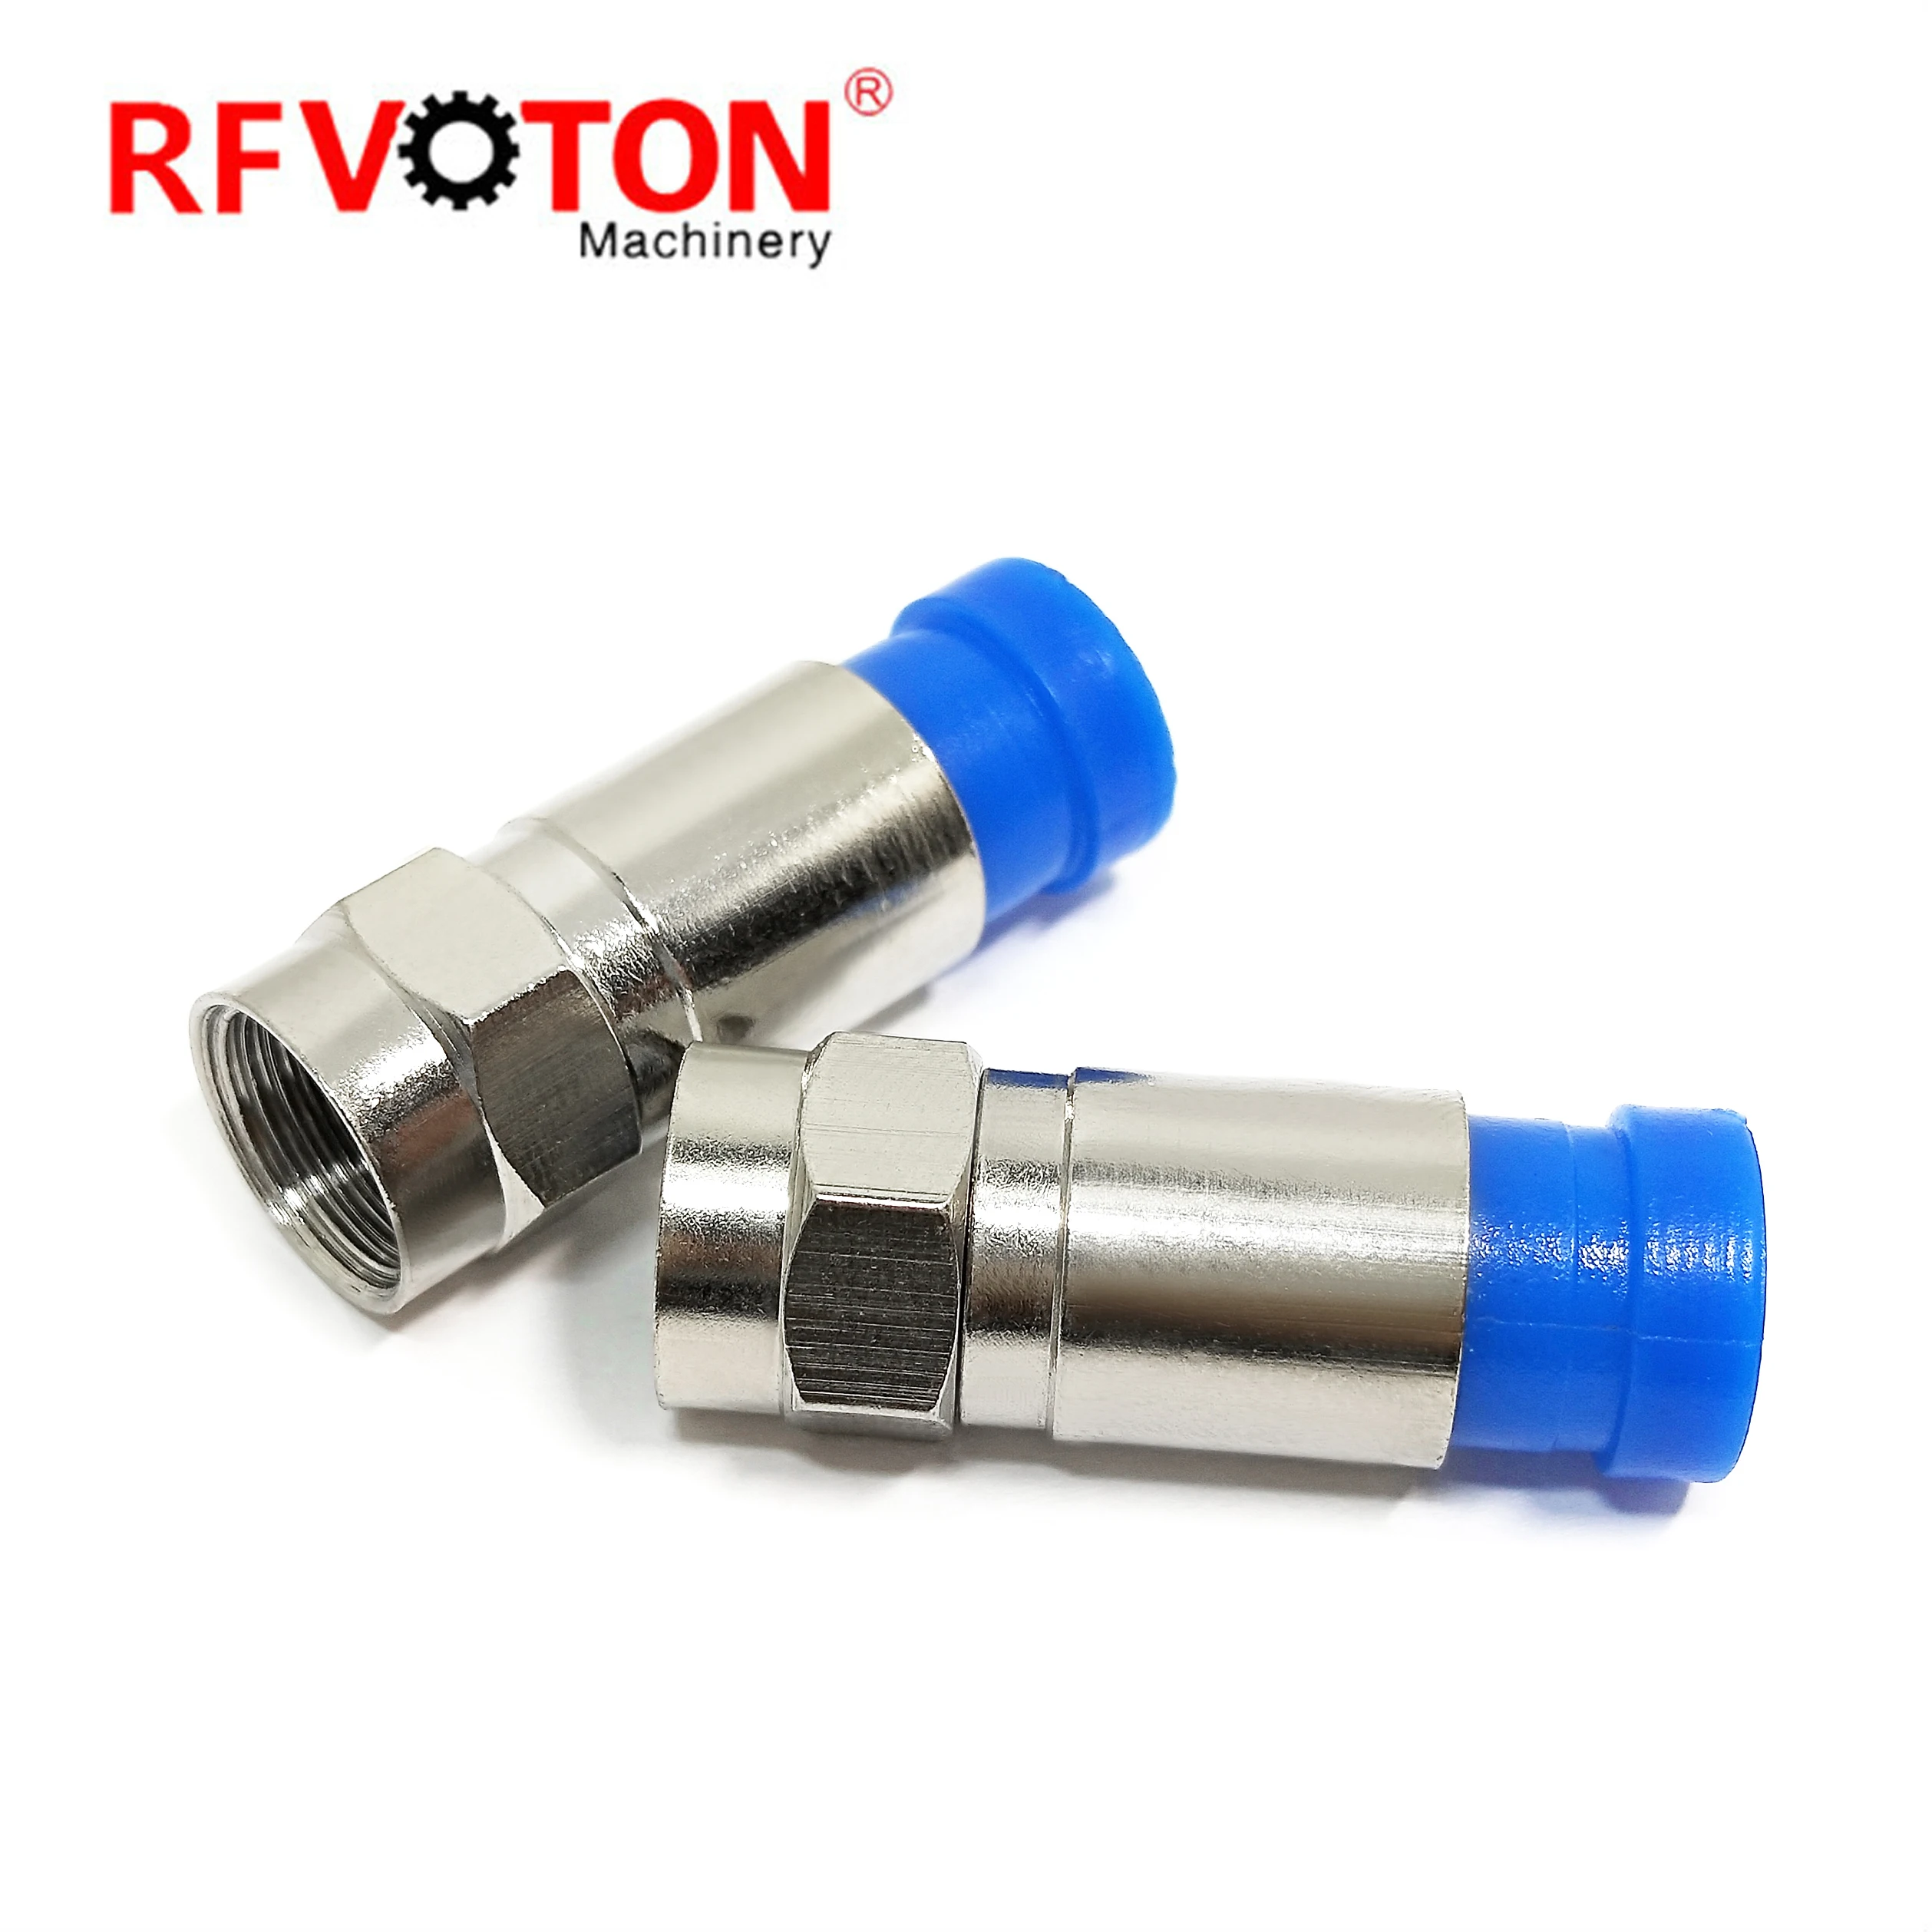 Factory supply low price F male plug straight compression rg6 cable rf coaxial connectors in stock factory